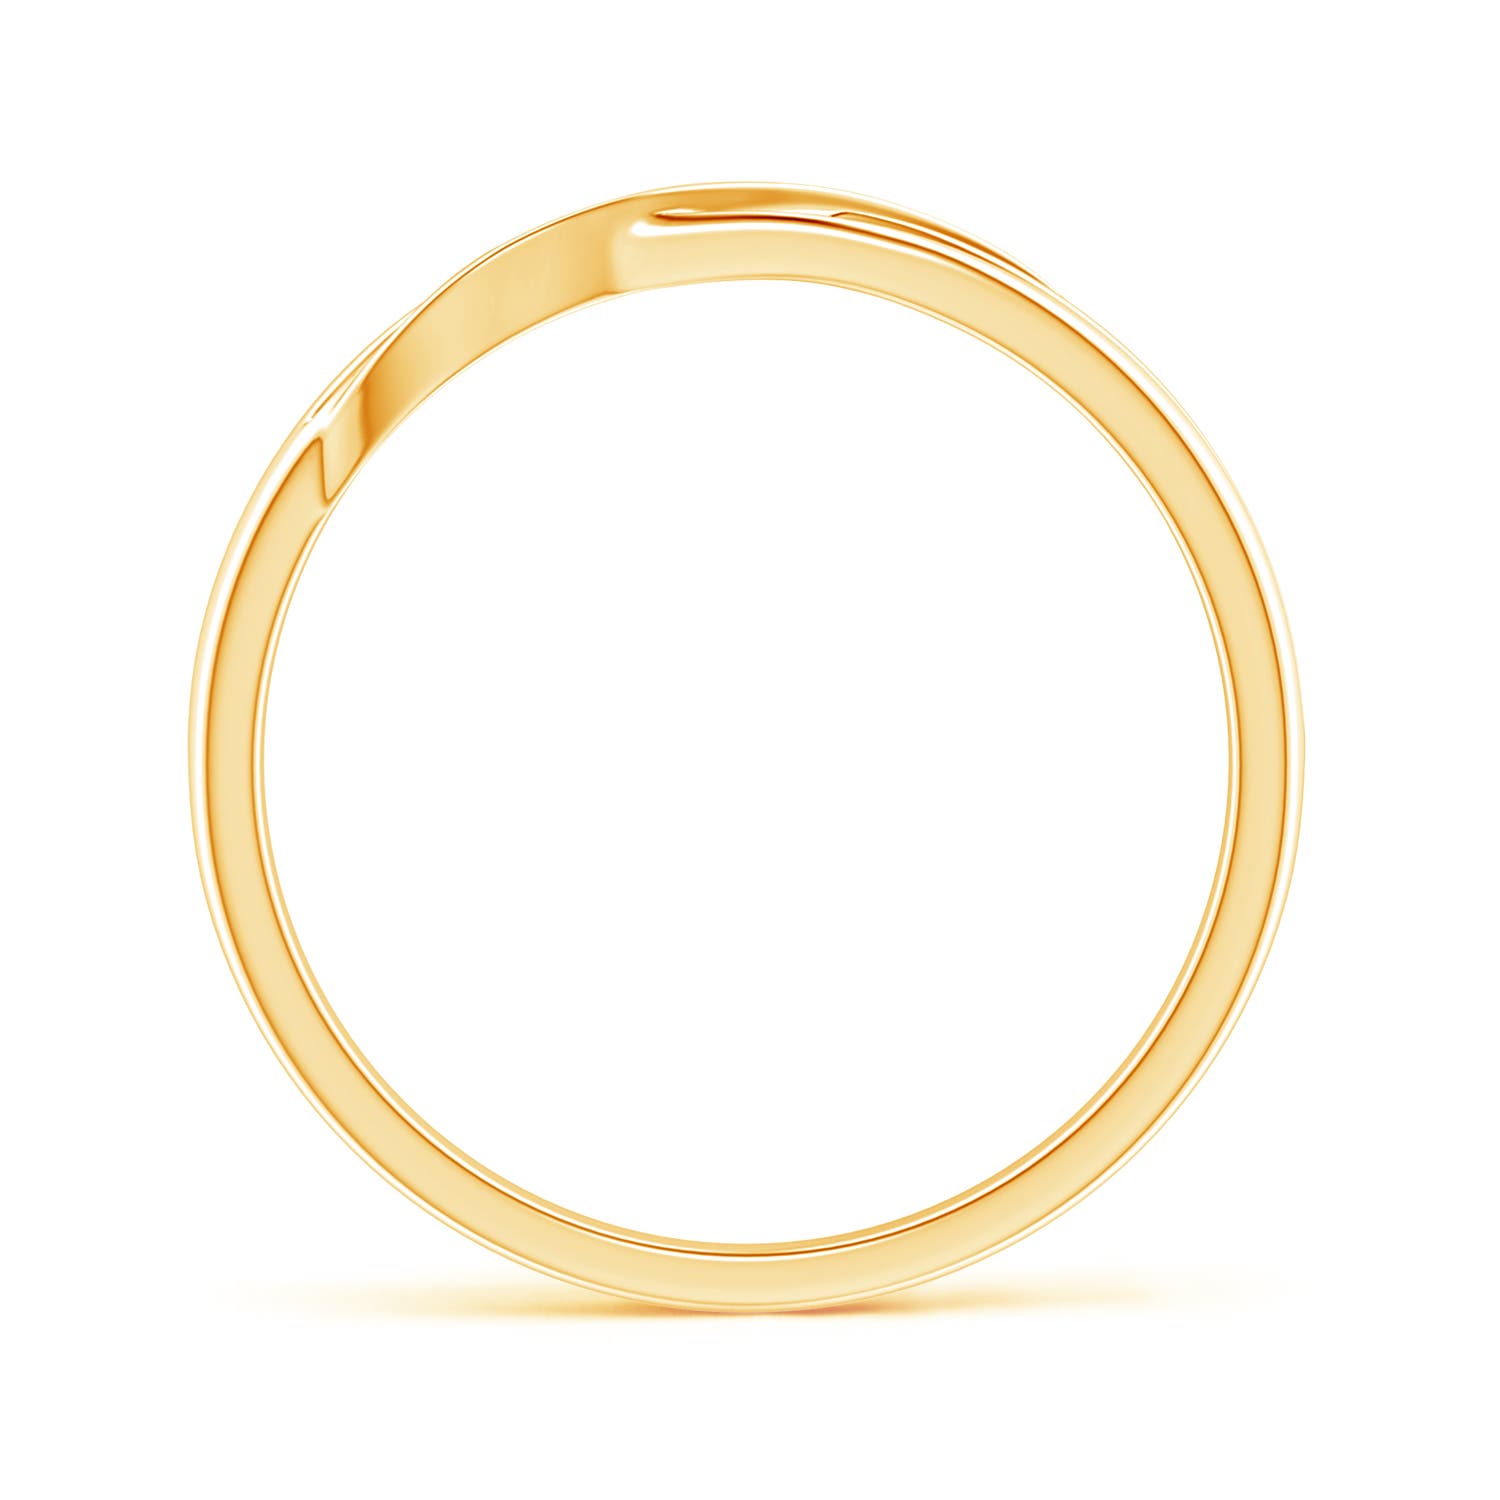 H, SI2 / 0.08 CT / 14 KT Yellow Gold